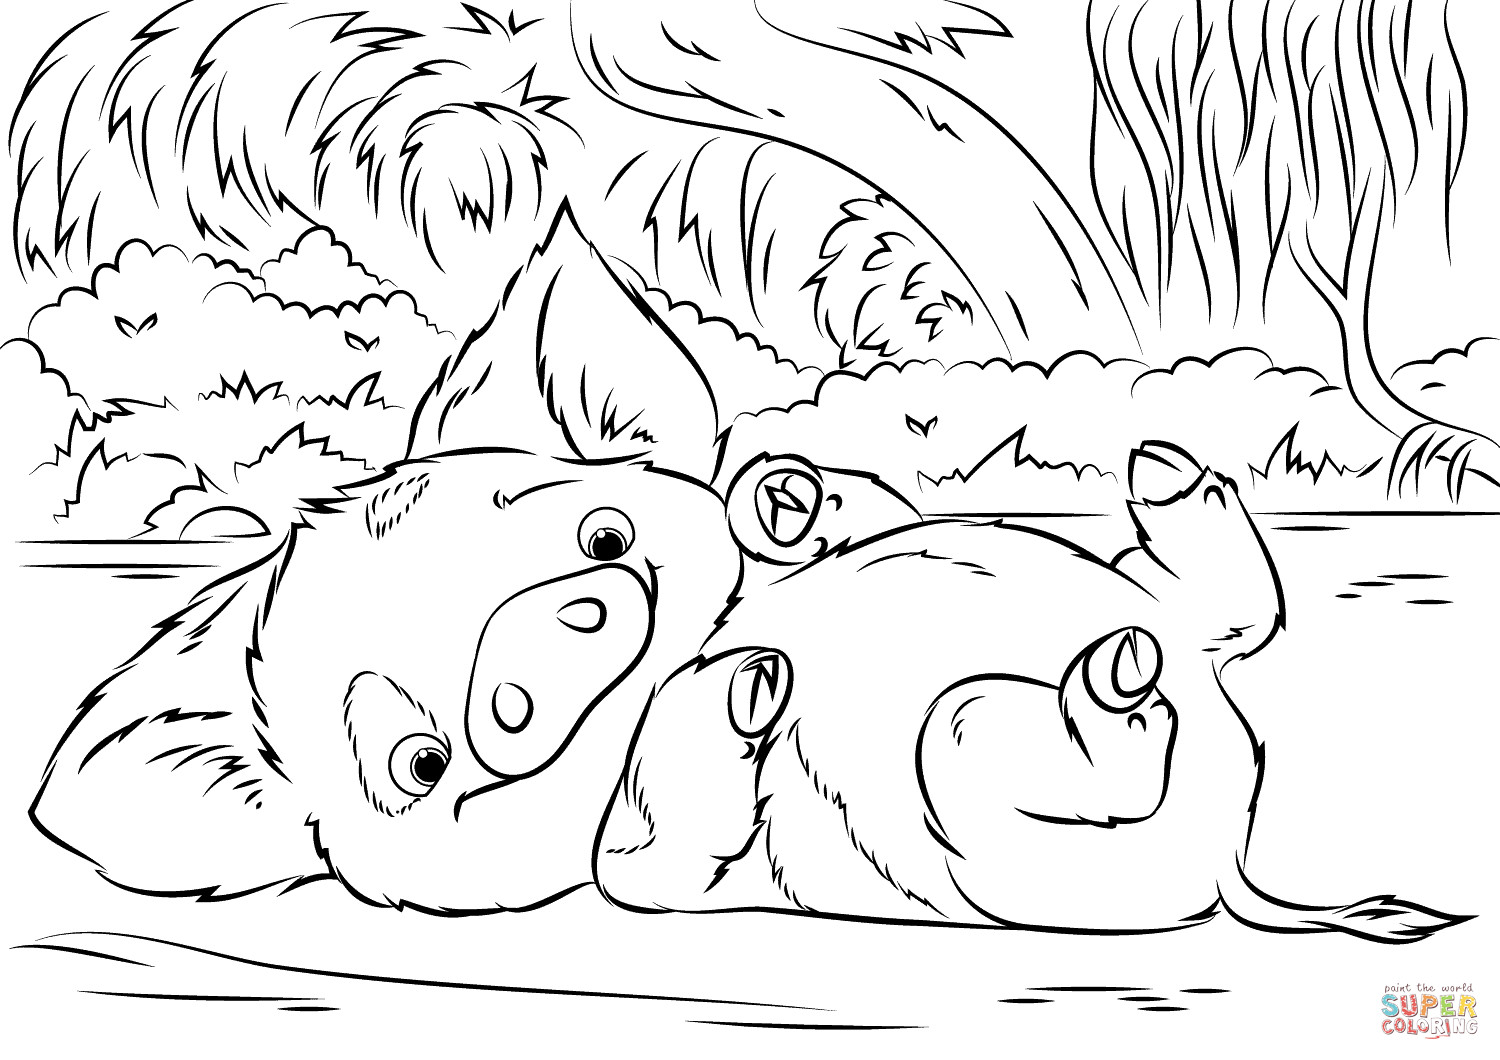 Printable Moana Coloring Pages
 Pua Pet Pig from Moana coloring page